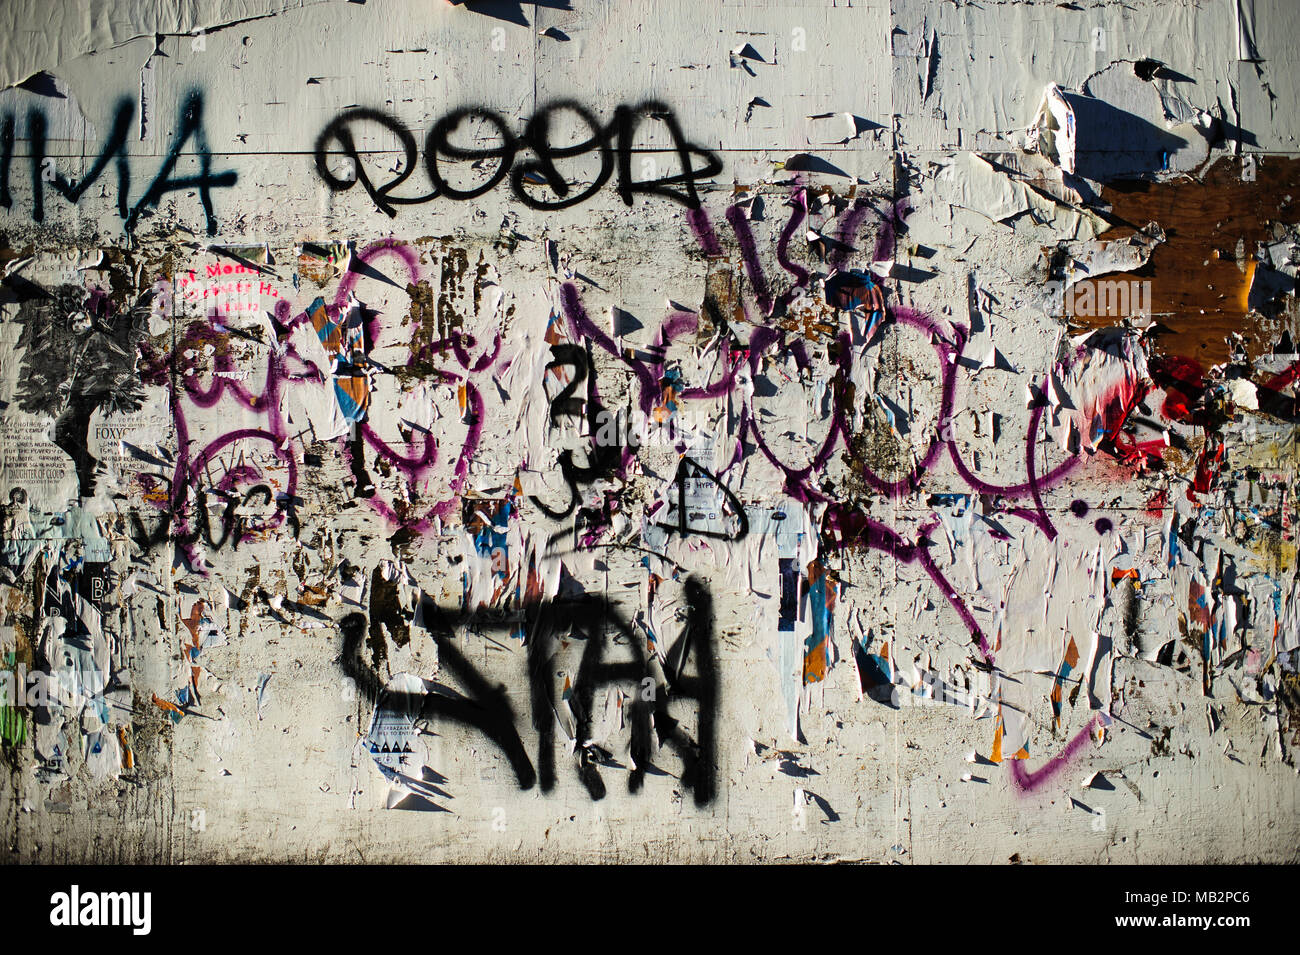 Graffiti covers white walls in New York City, March 2013. Stock Photo